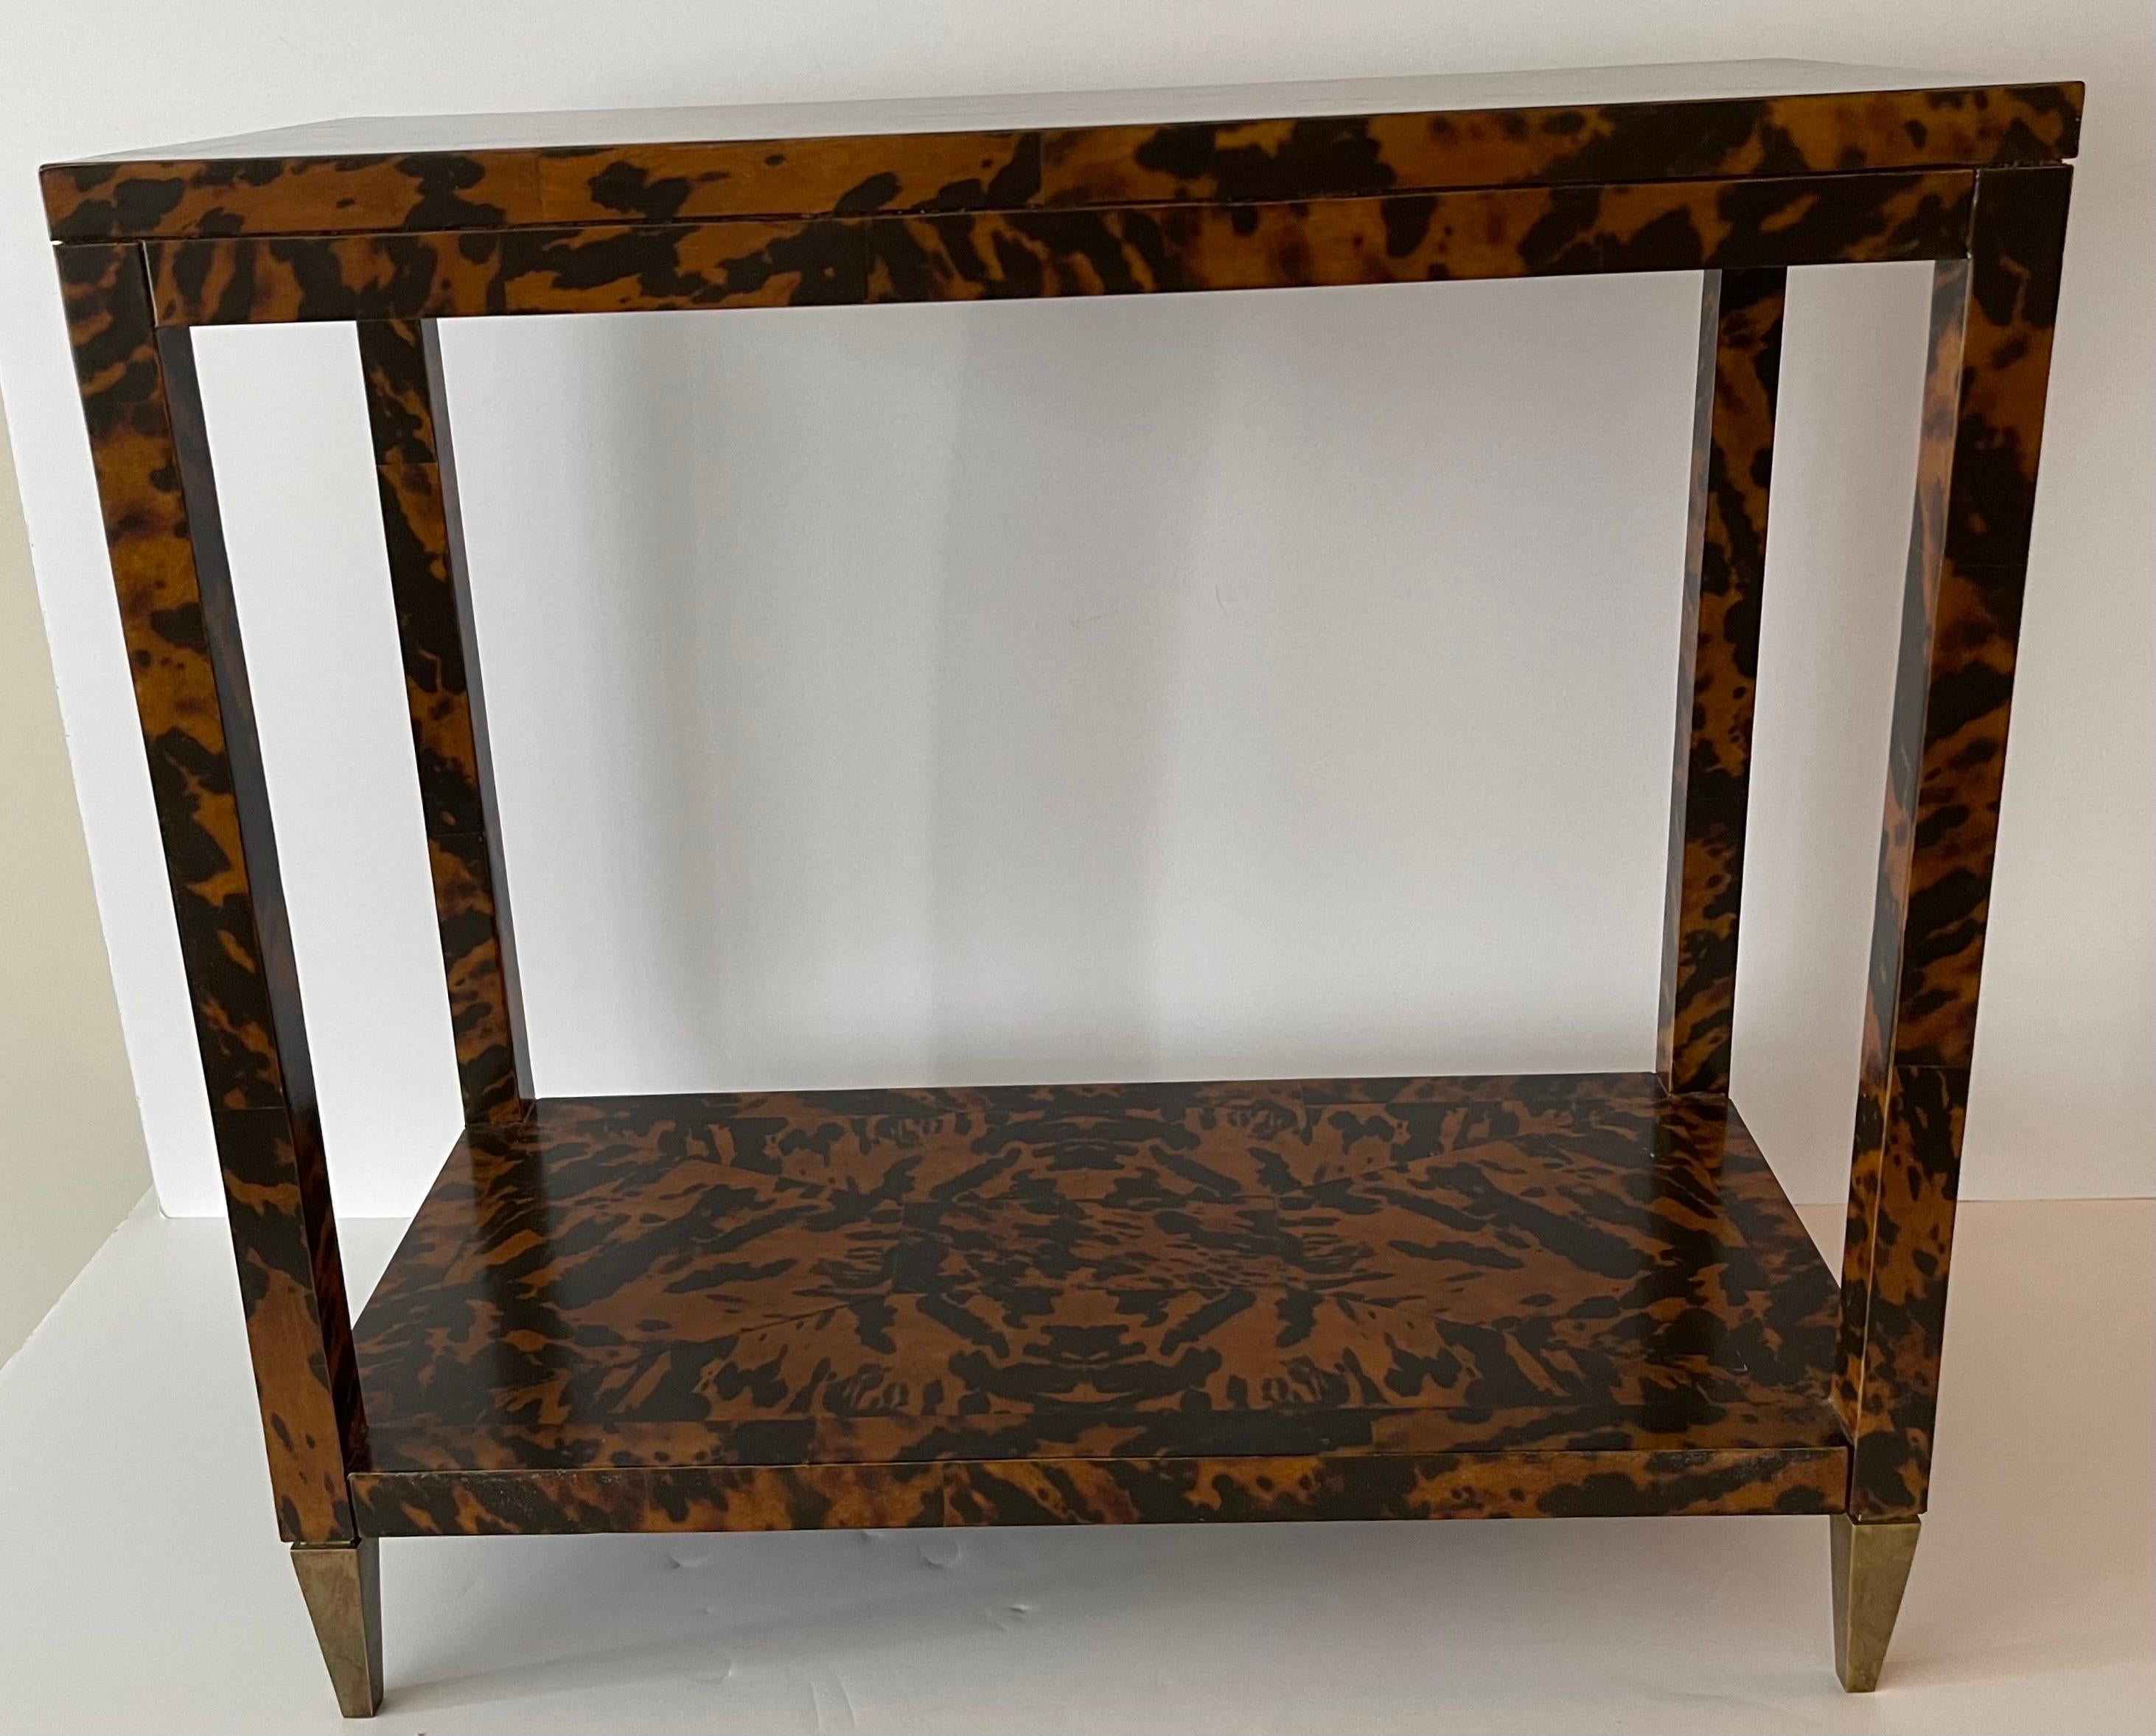 Oscar de la Renta Home by Century Furniture Co. faux tortoise side table. Two tier design with faux tortoise veneer and brass capped feet. Signed on the underside.